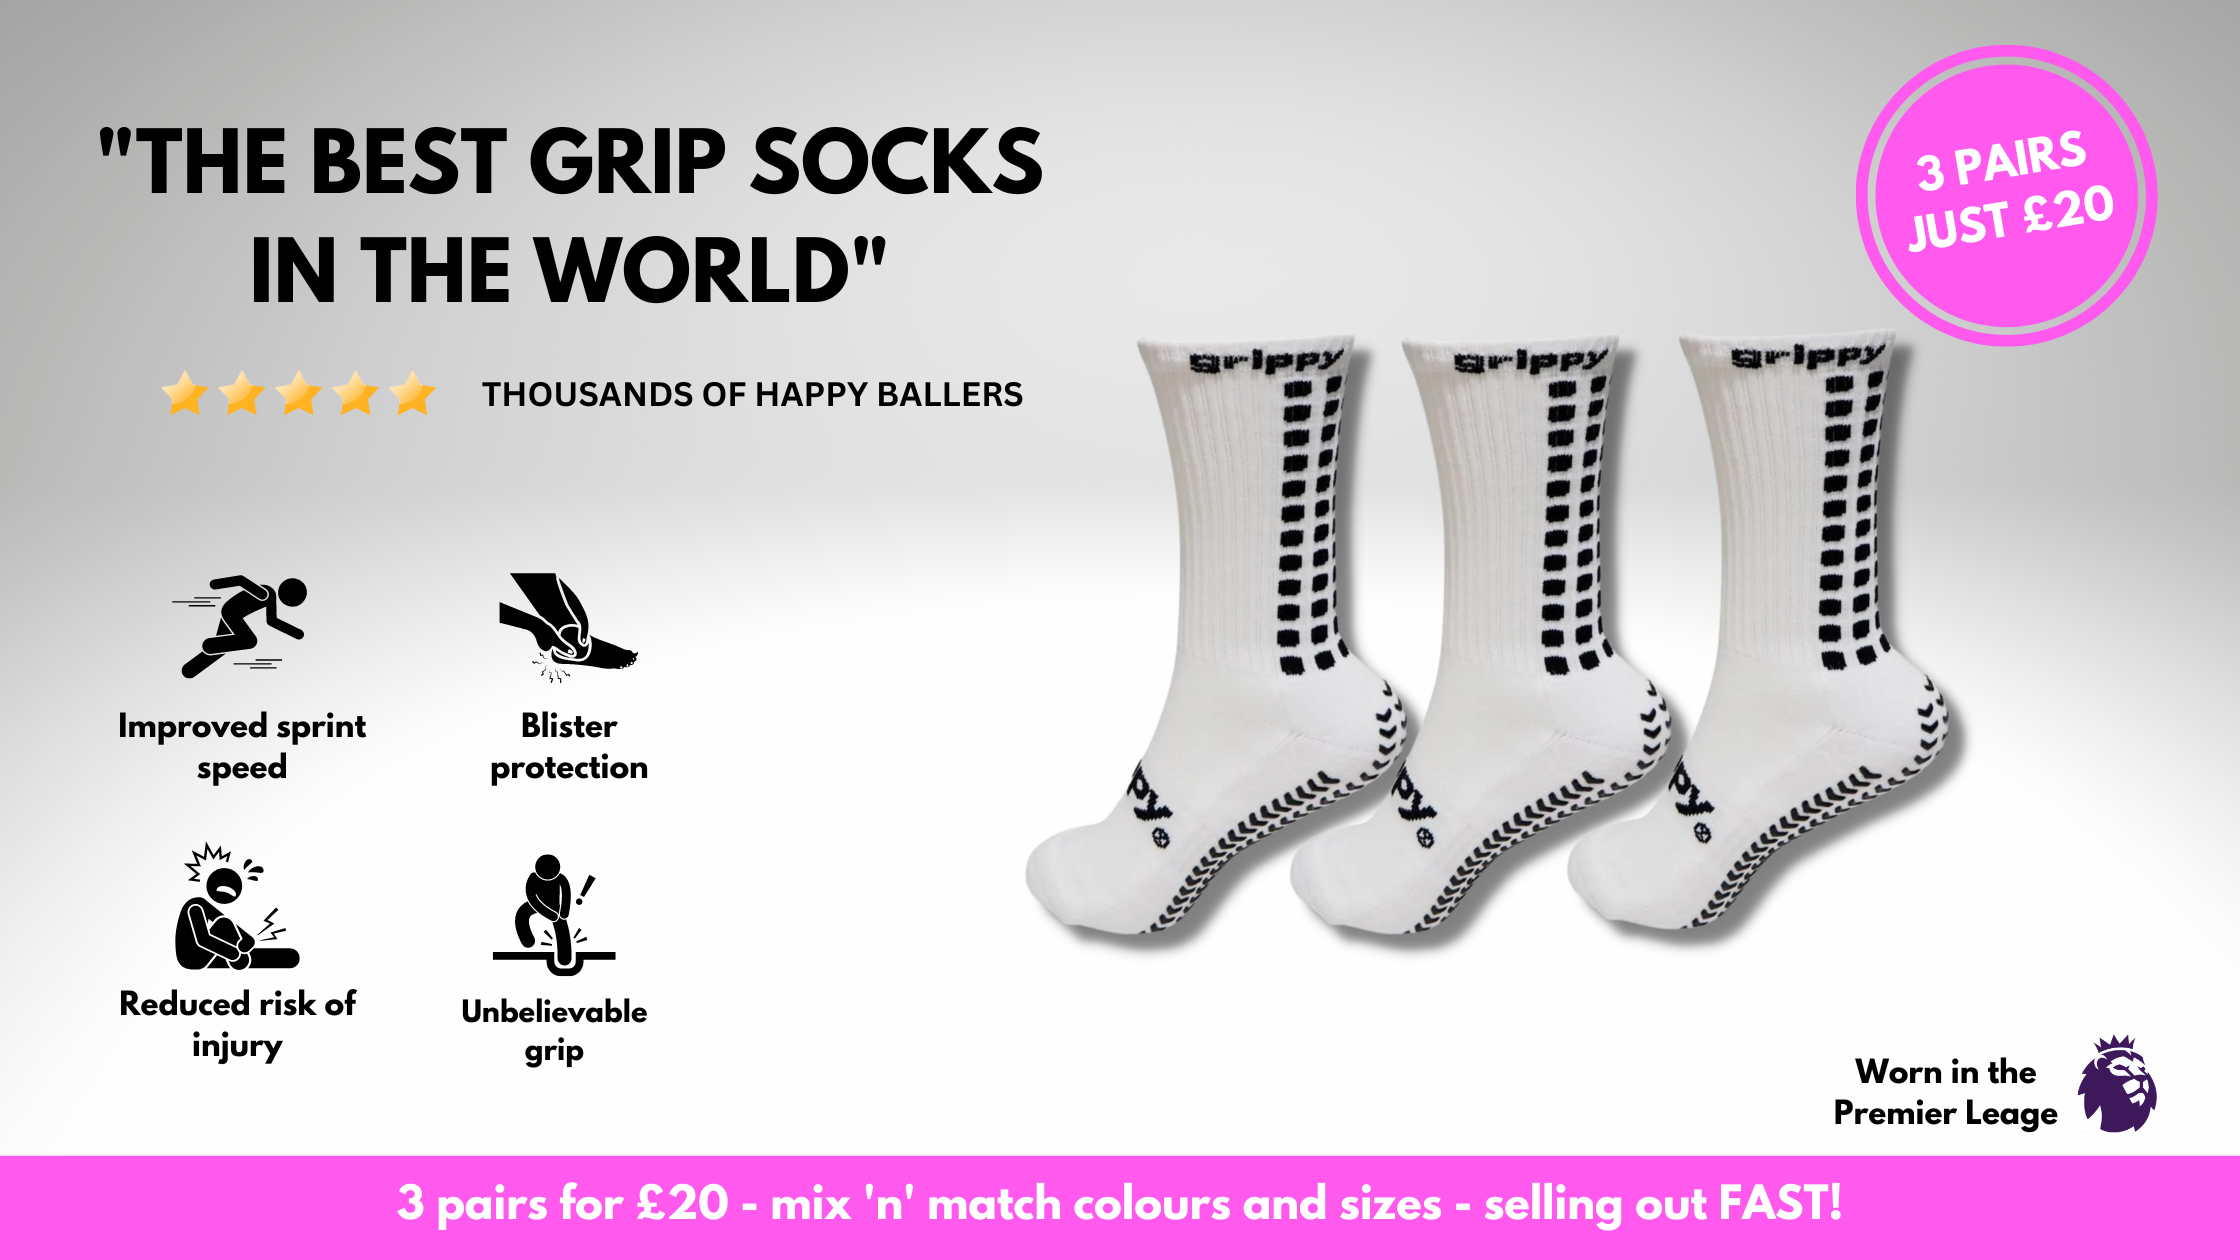 Grippy sports benefits of grip socks recommended by premier league